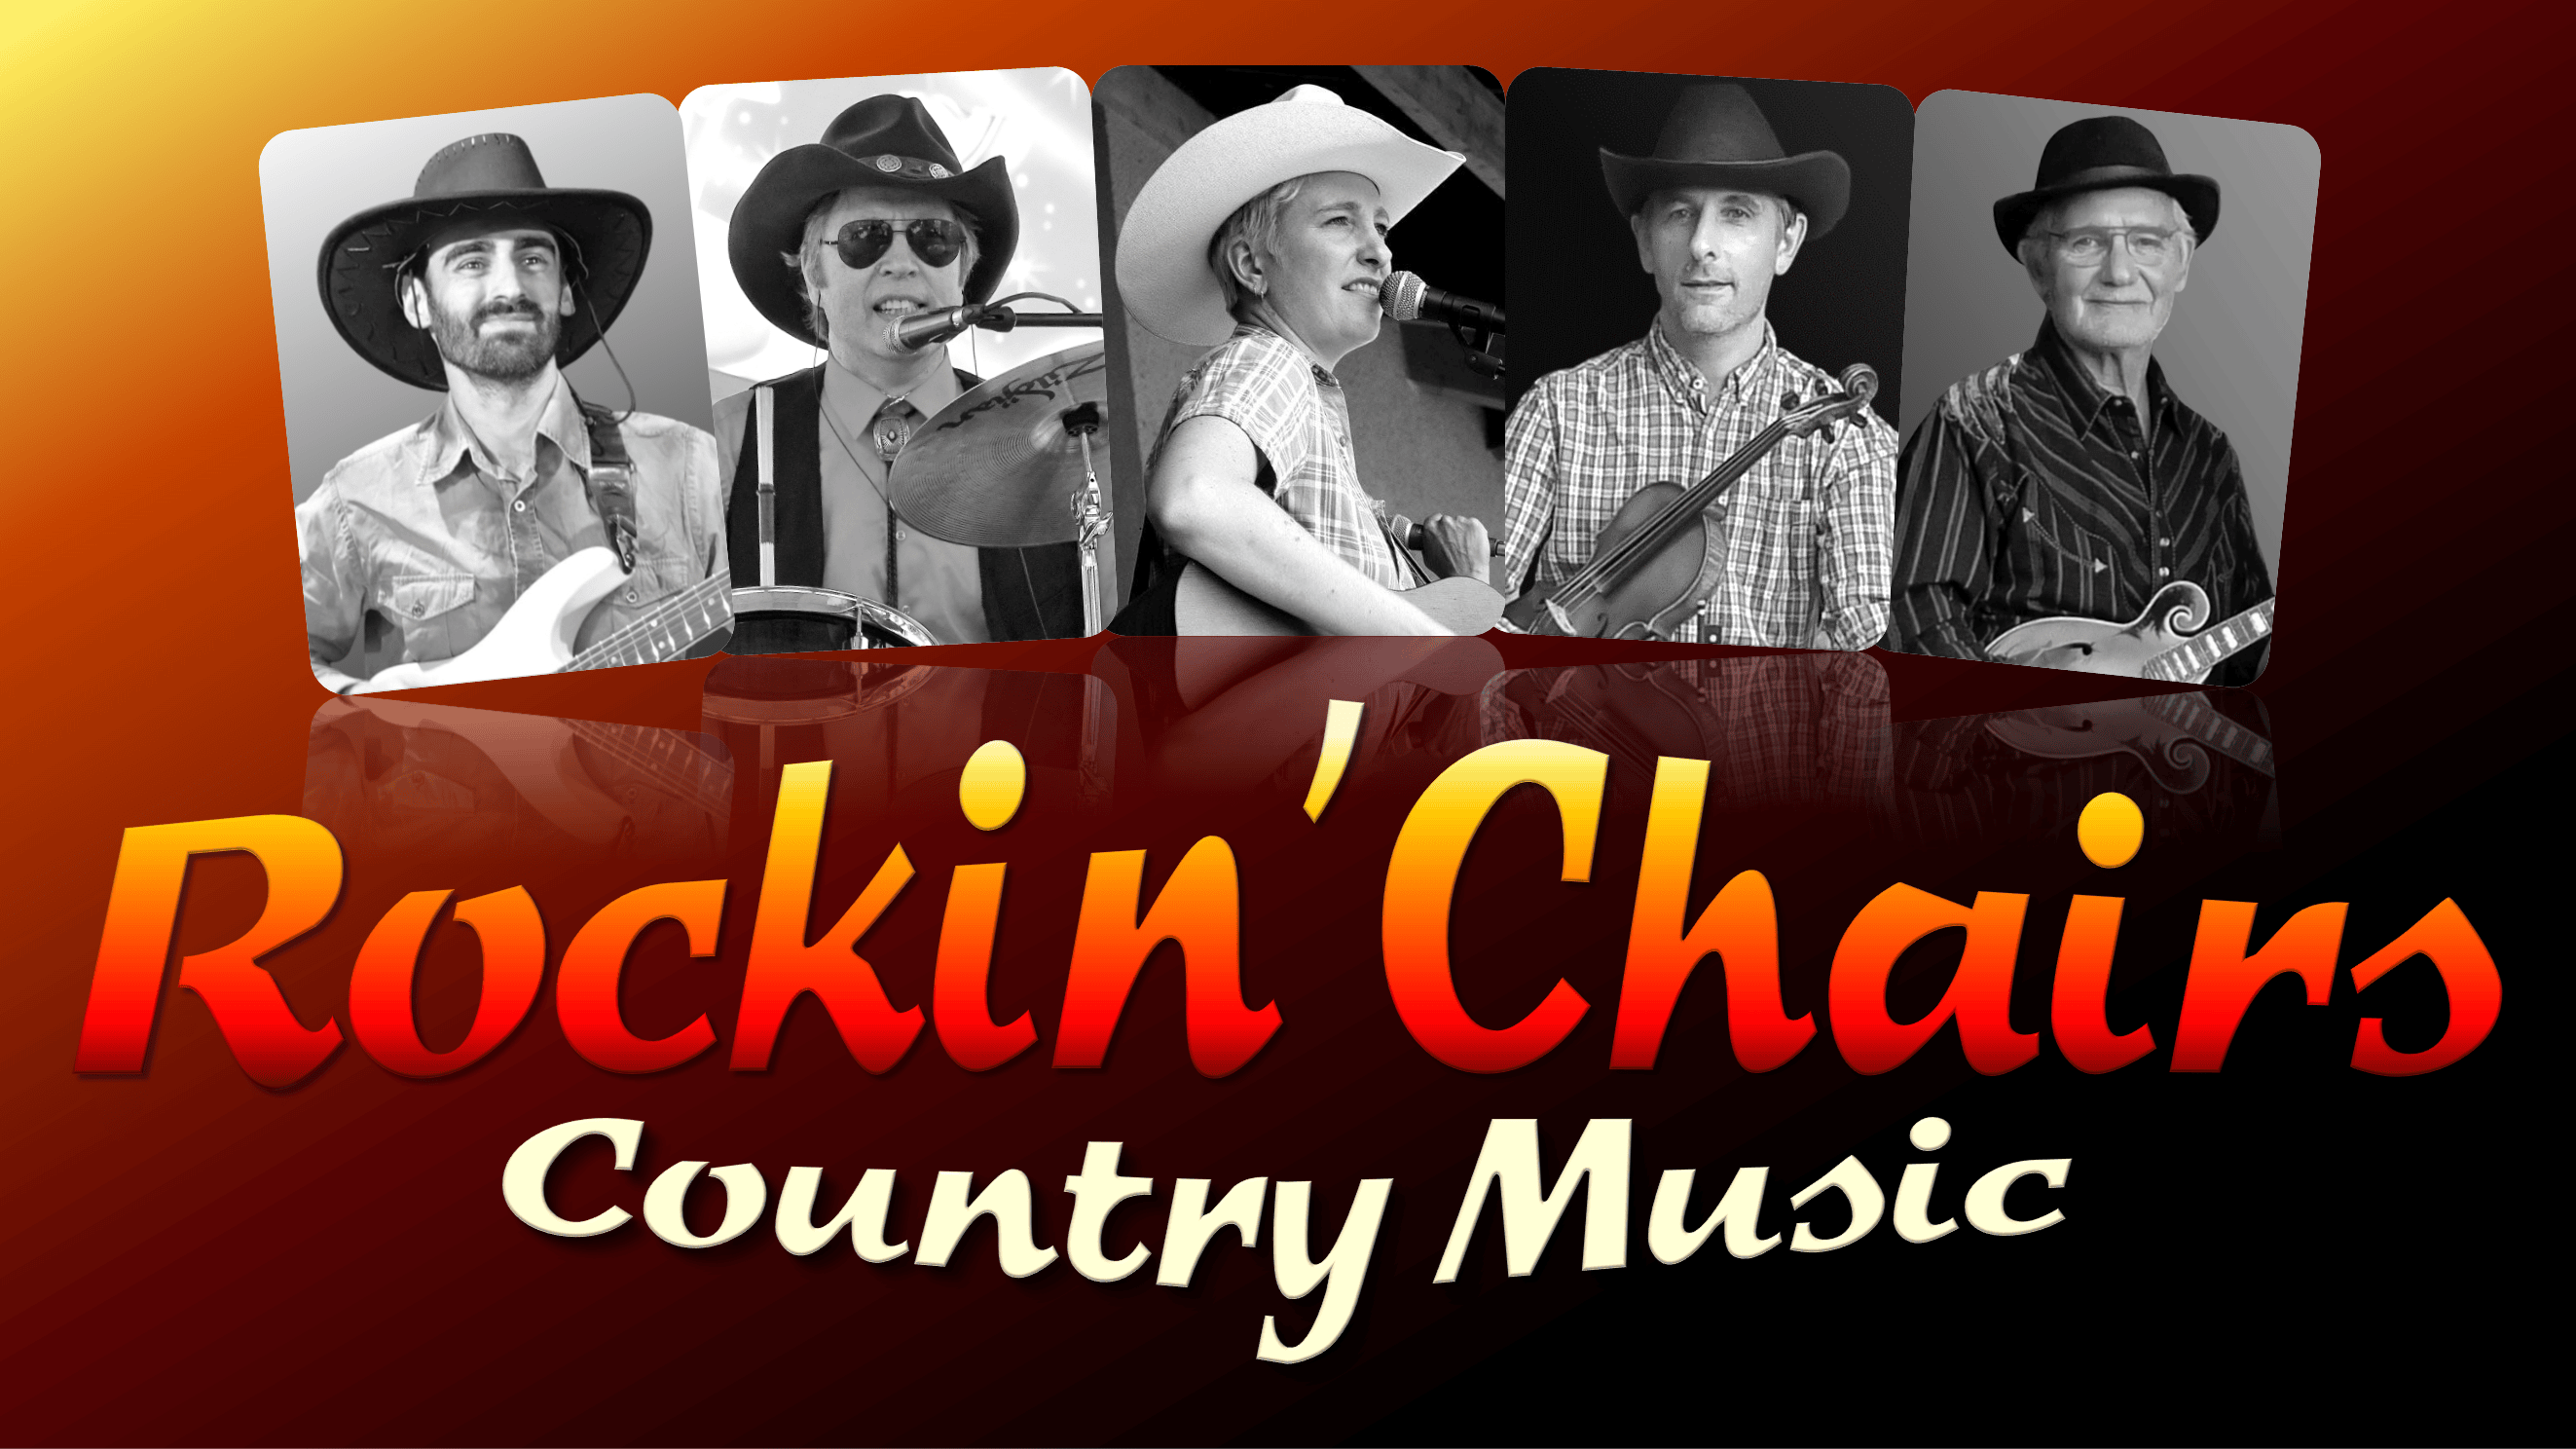 Affiche HD Rockin' Chairs, groupe country rock, orchestre country rock